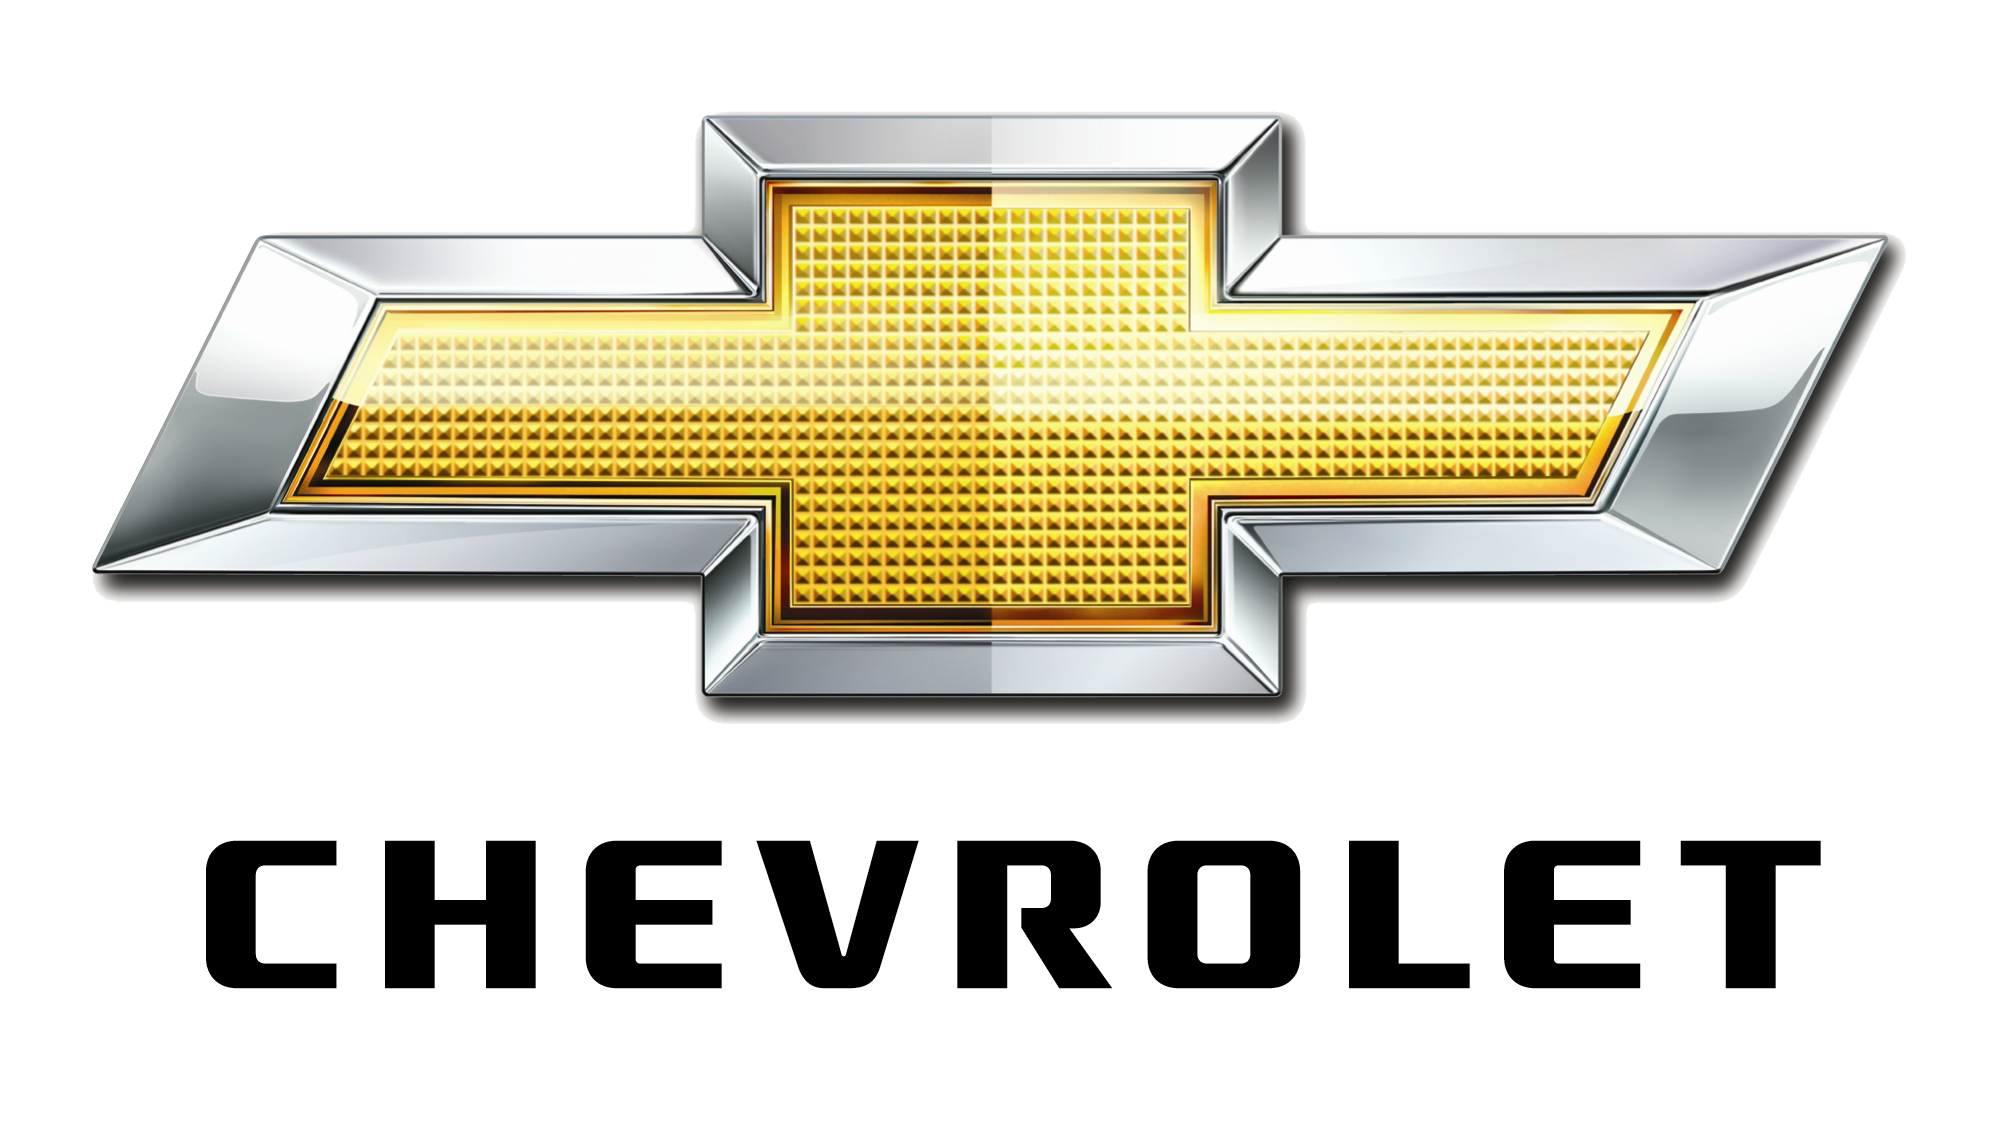 Chevy logo chevrolet car symbol meaning and history brand png